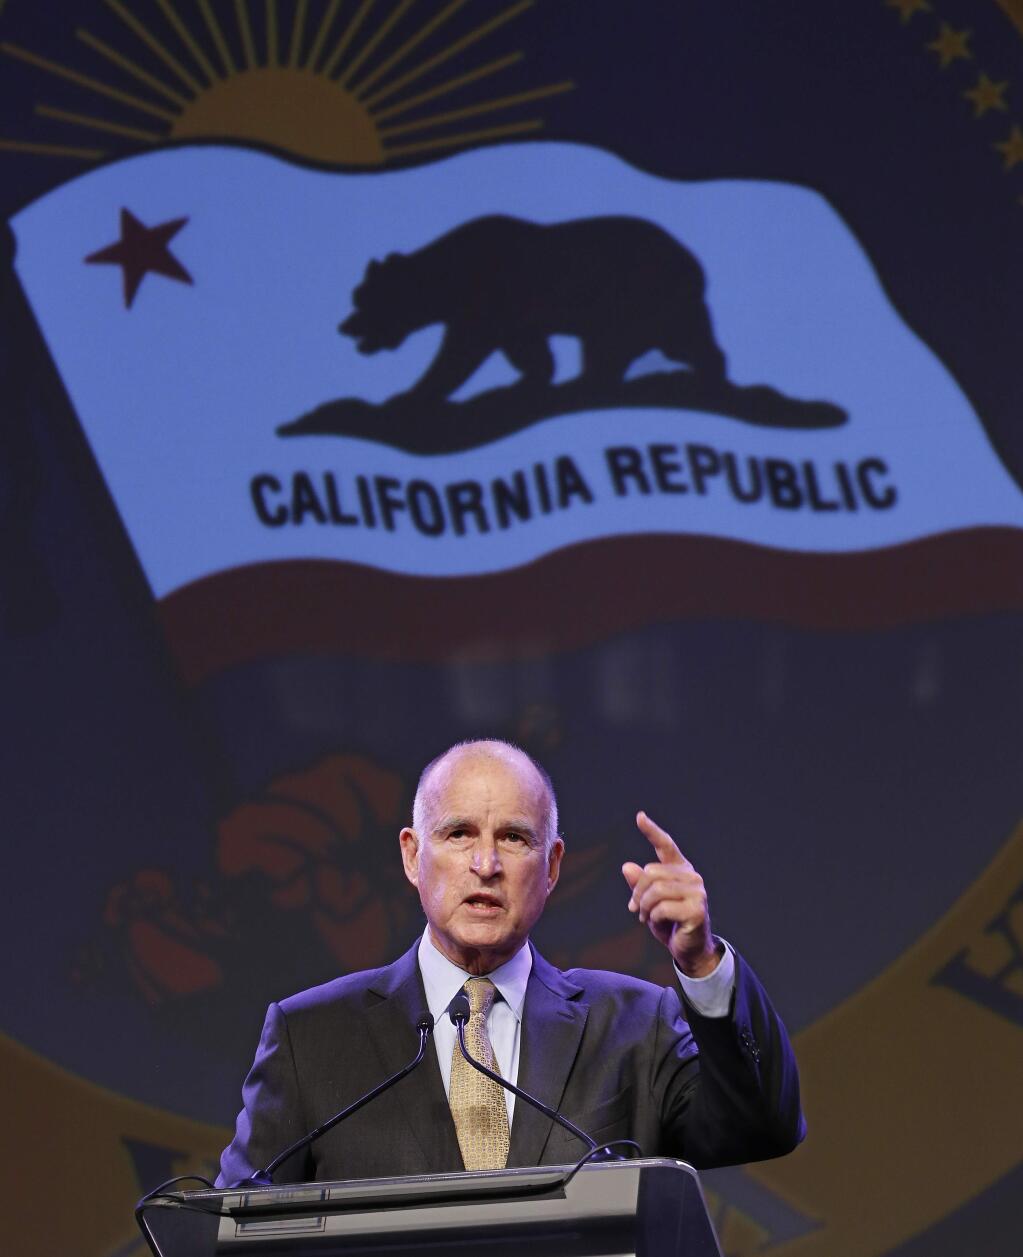 California Gov. Jerry Brown gestures as he speaks at the 91st Annual Sacramento Host Breakfast Wednesday, May 18, 2016, in Sacramento, Calif. (AP Photo/Rich Pedroncelli)